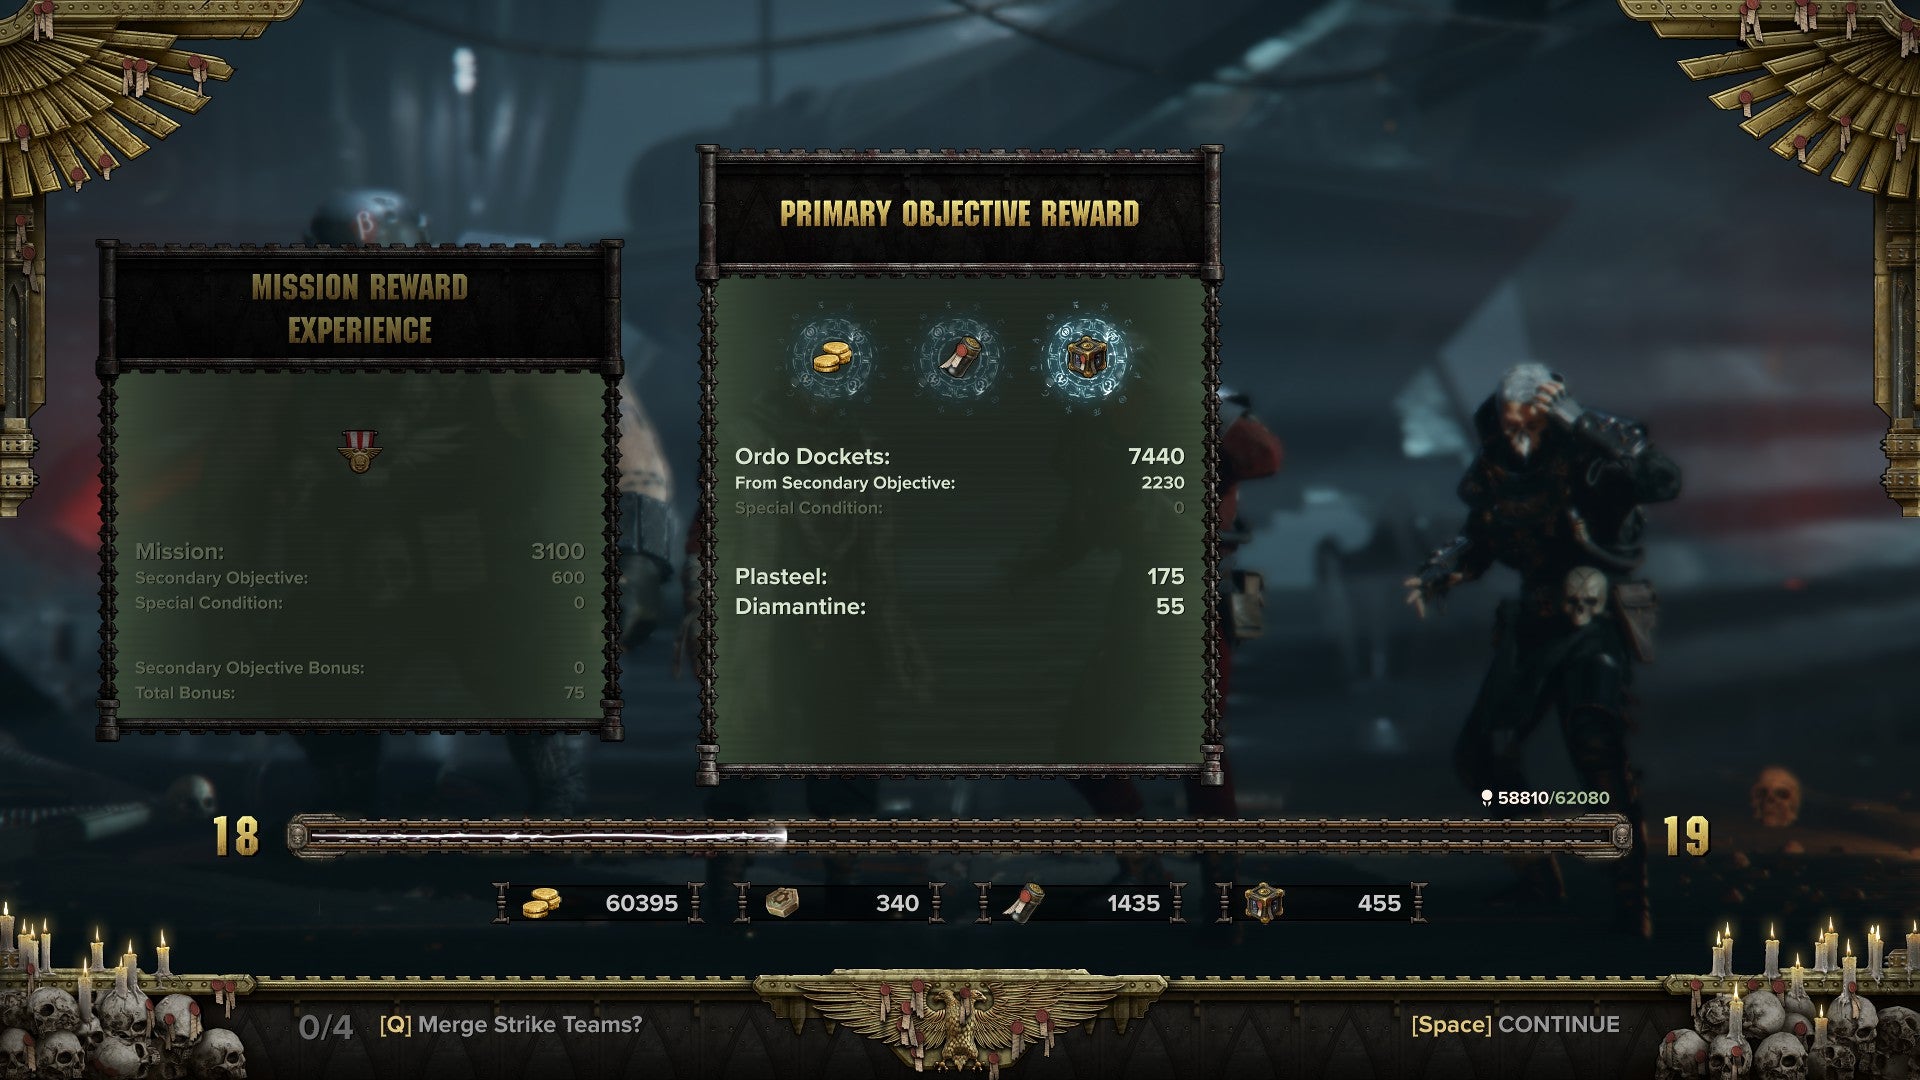 Darktide review - the end of level screen showing some rewards but not enough info